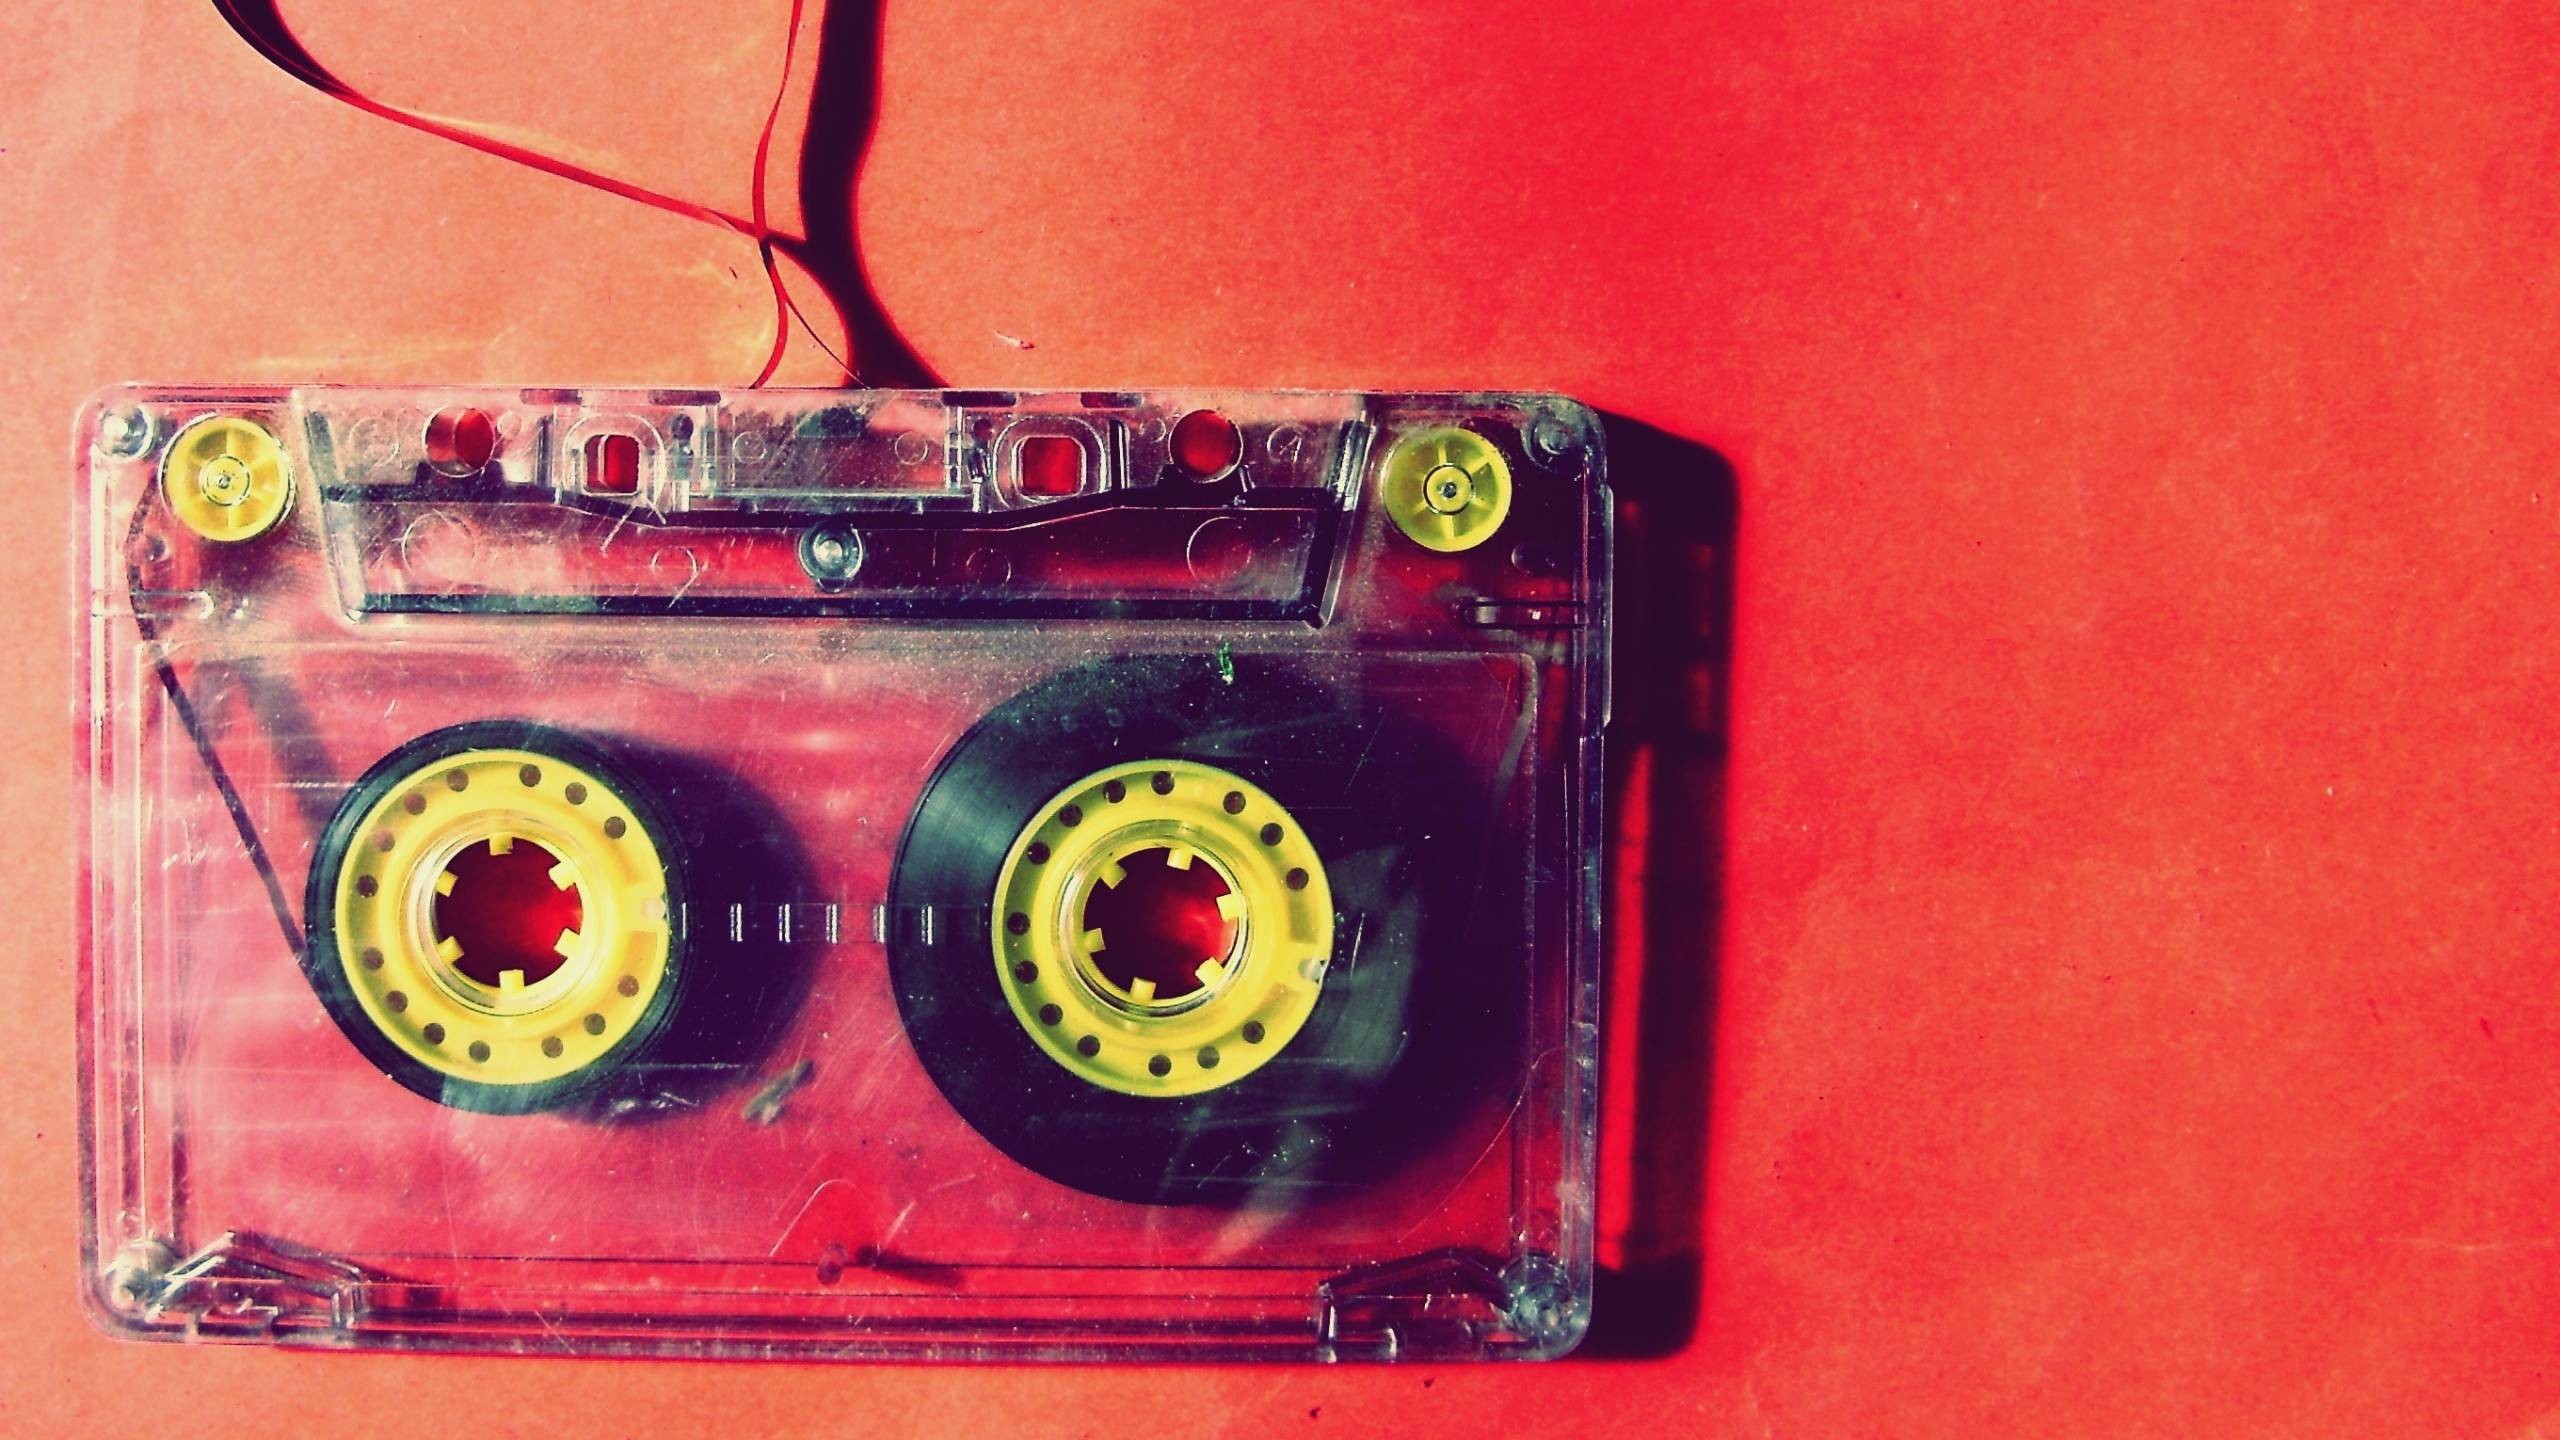 General 2560x1440 cassette vintage colorful music red background audio red